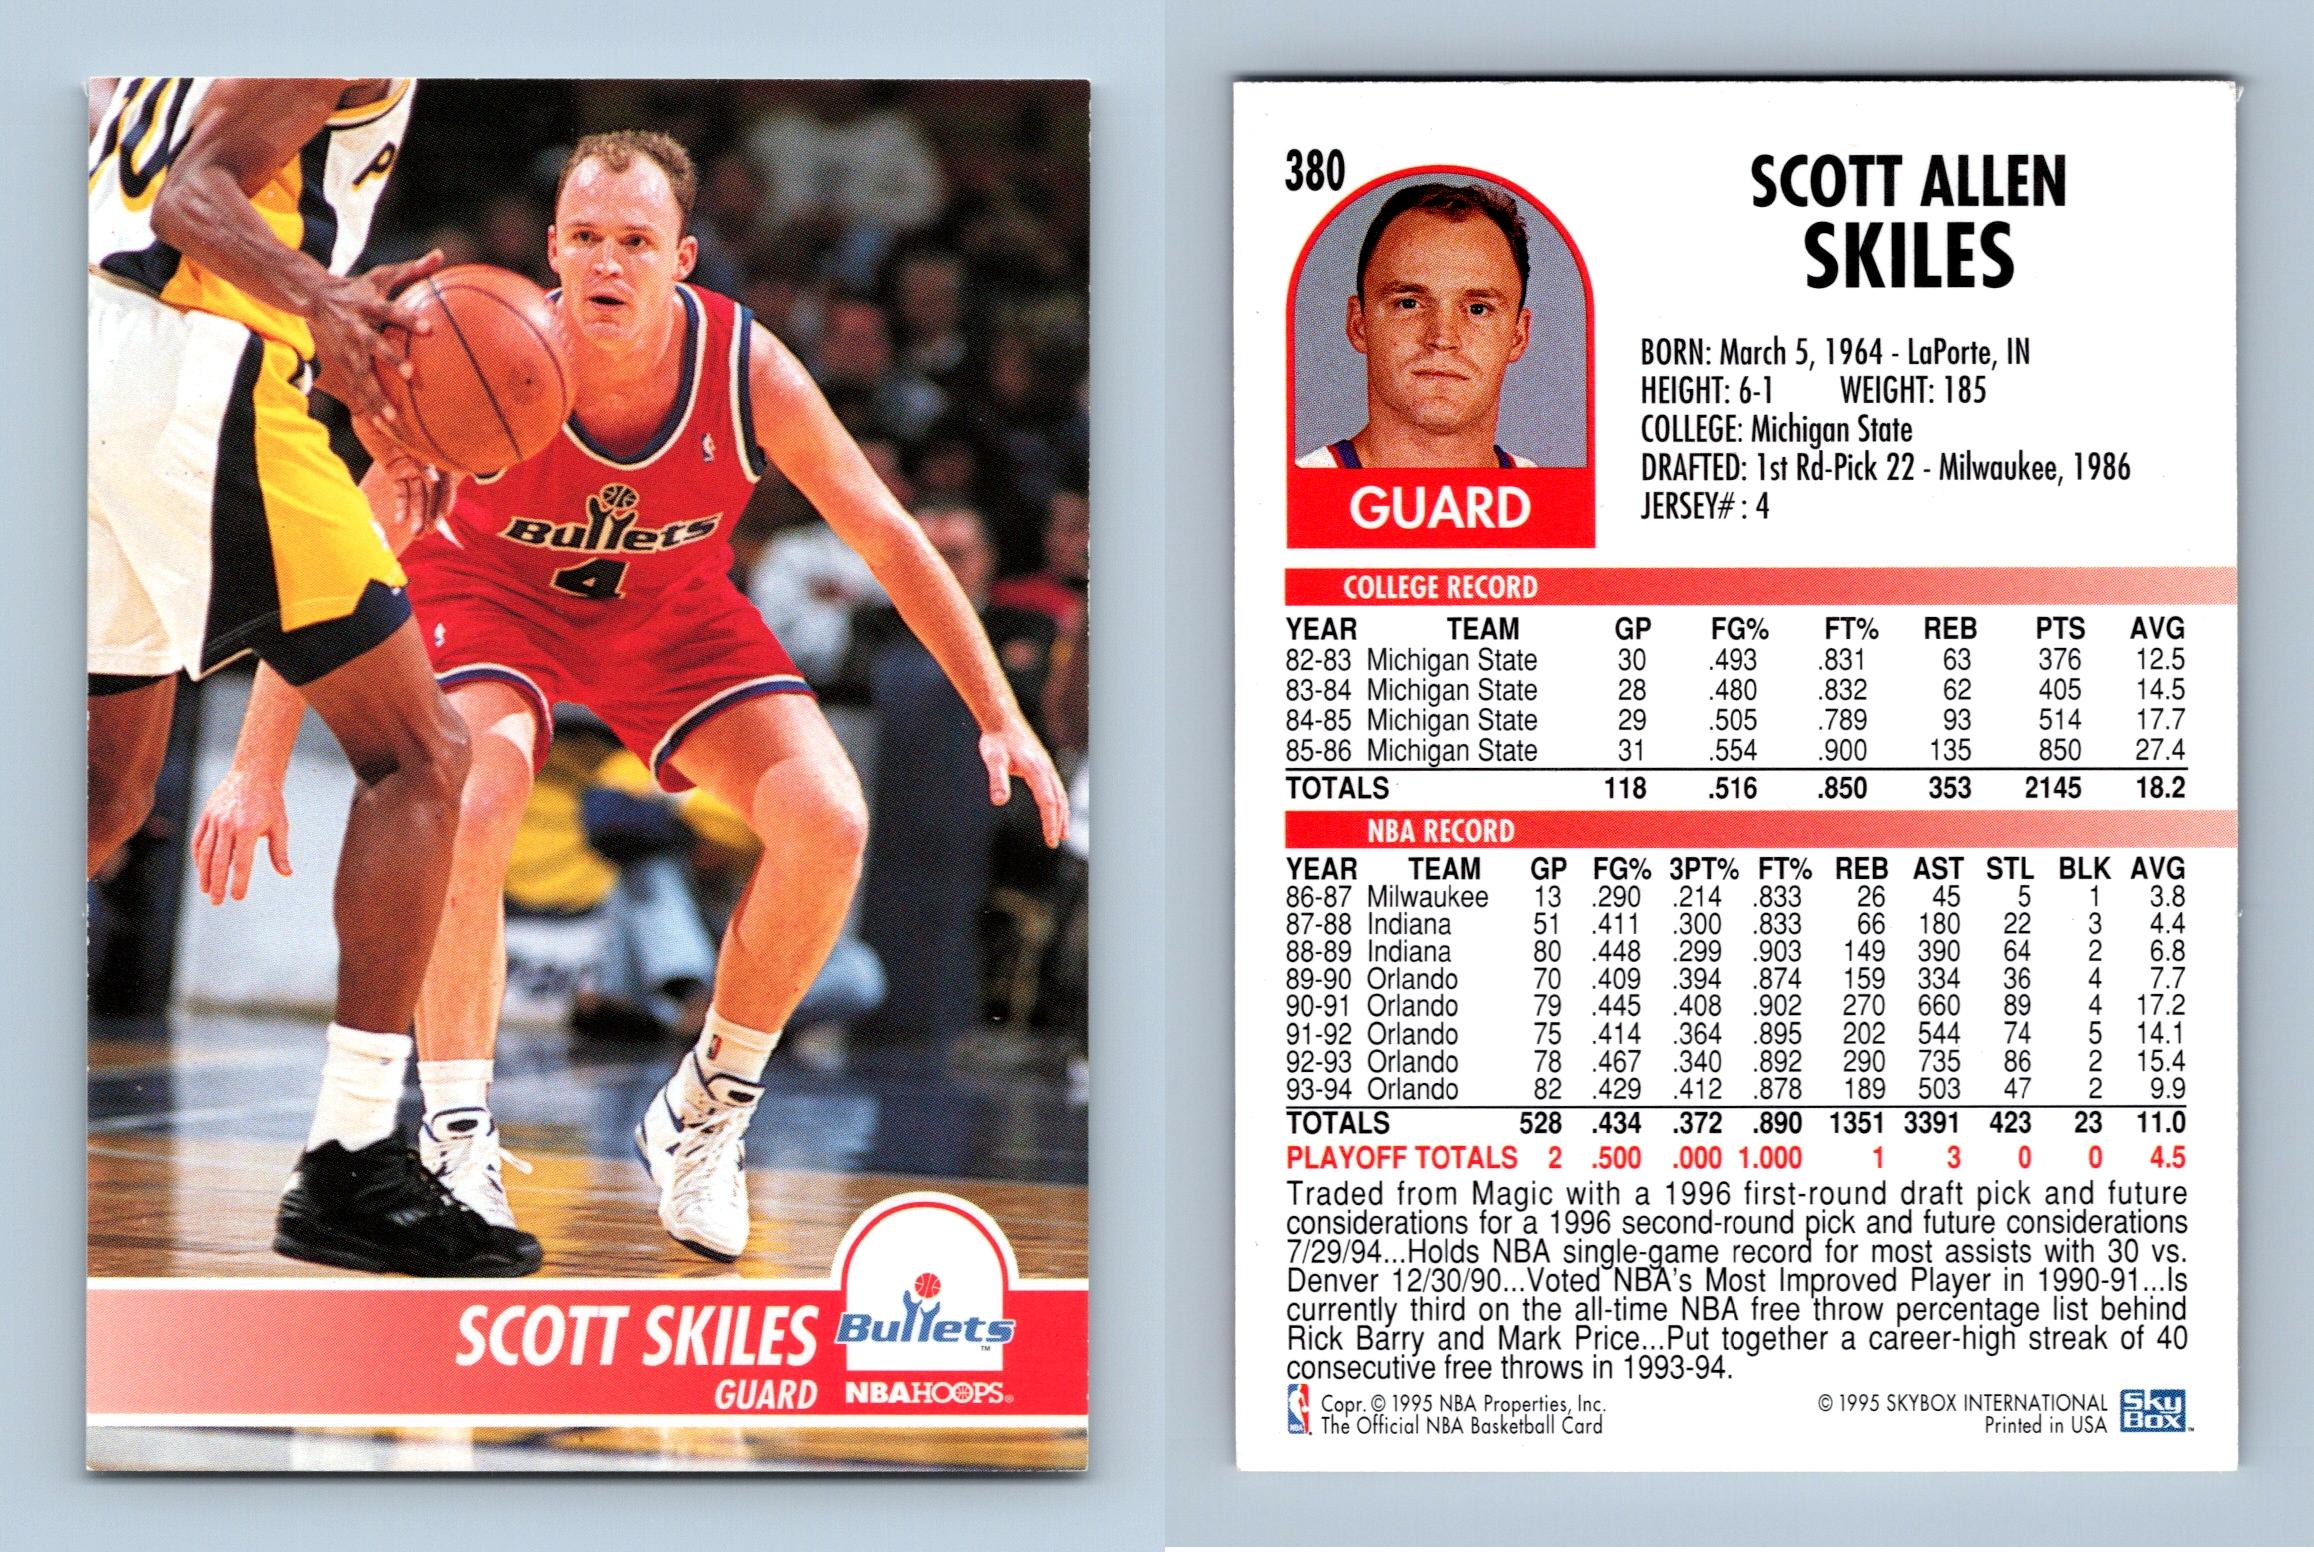 Flashback: Scott Skiles sets NBA record with 30 assists